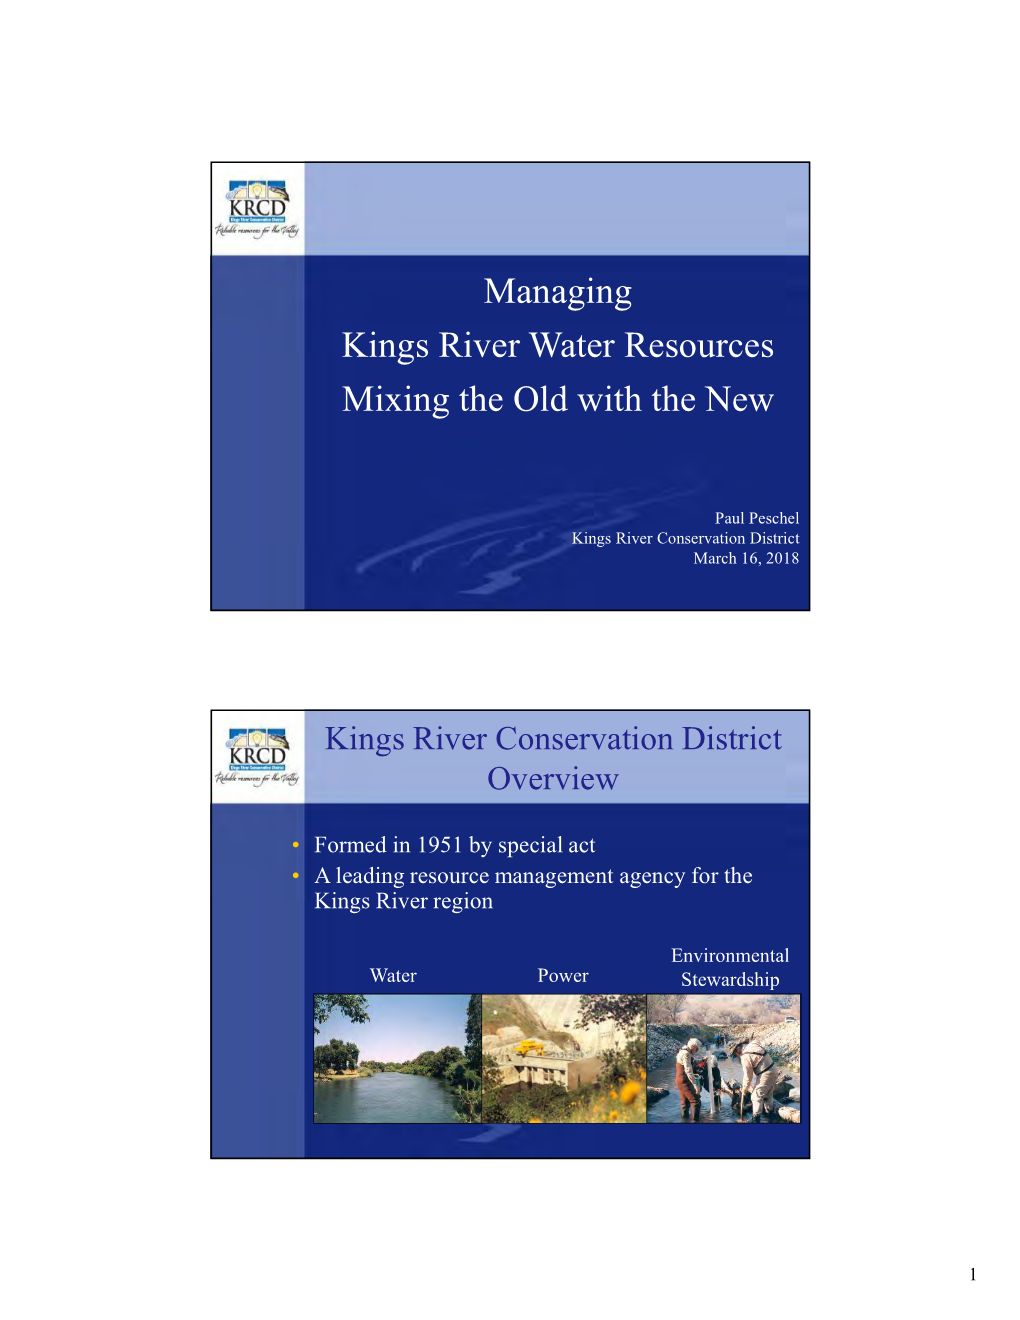 Managing Kings River Water Resources Mixing the Old with the New